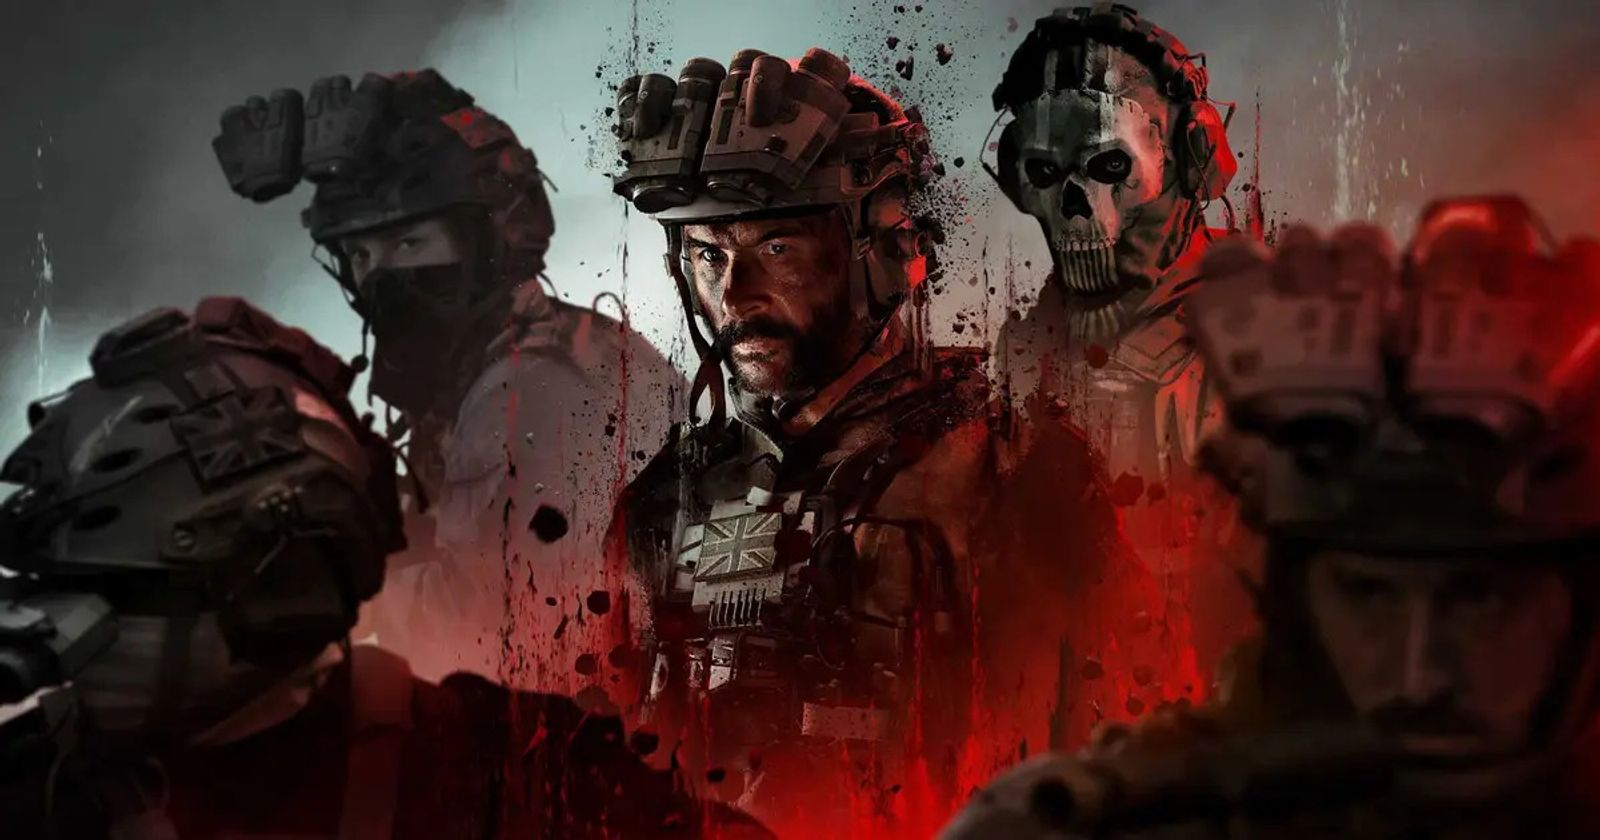 A Popular Perk From Black Ops Universe Has Been Confirmed for Call of Duty: Modern  Warfare 3 Zombies! - EssentiallySports